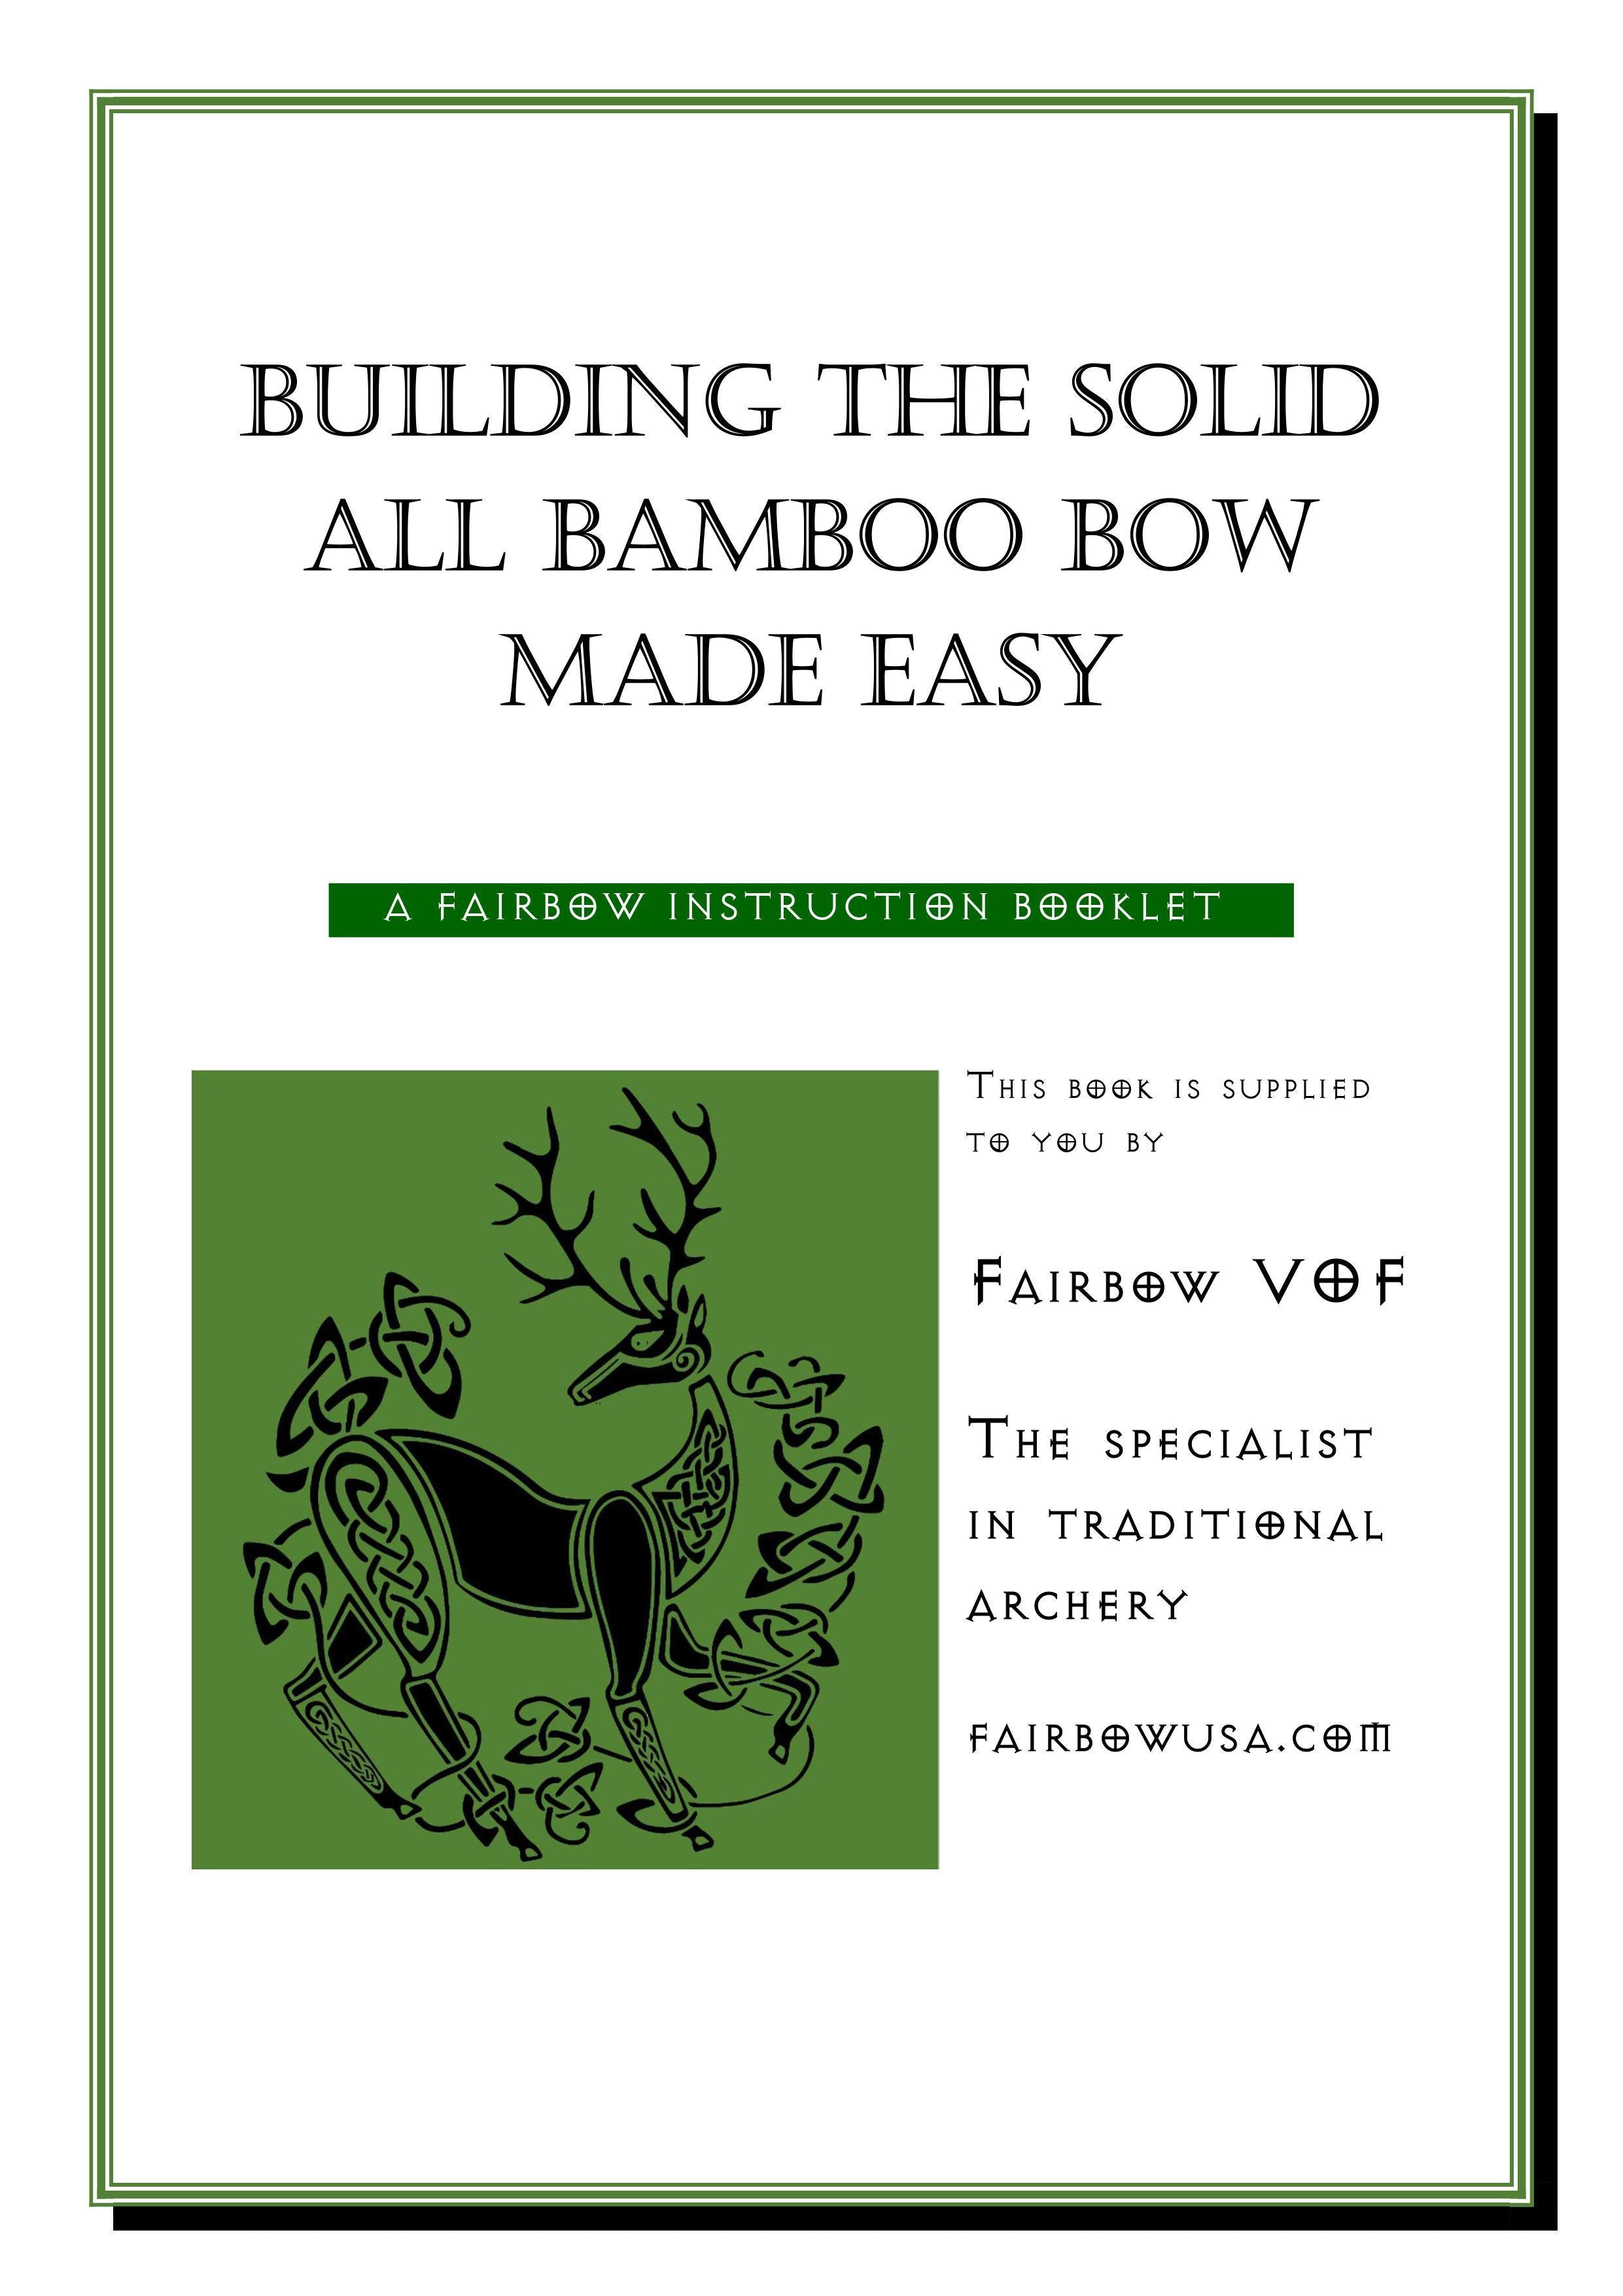 BUILDING THE SOLID ALL BAMBOO BOW MADE EASY E BOOKLET-Book-Fairbow-Fairbow